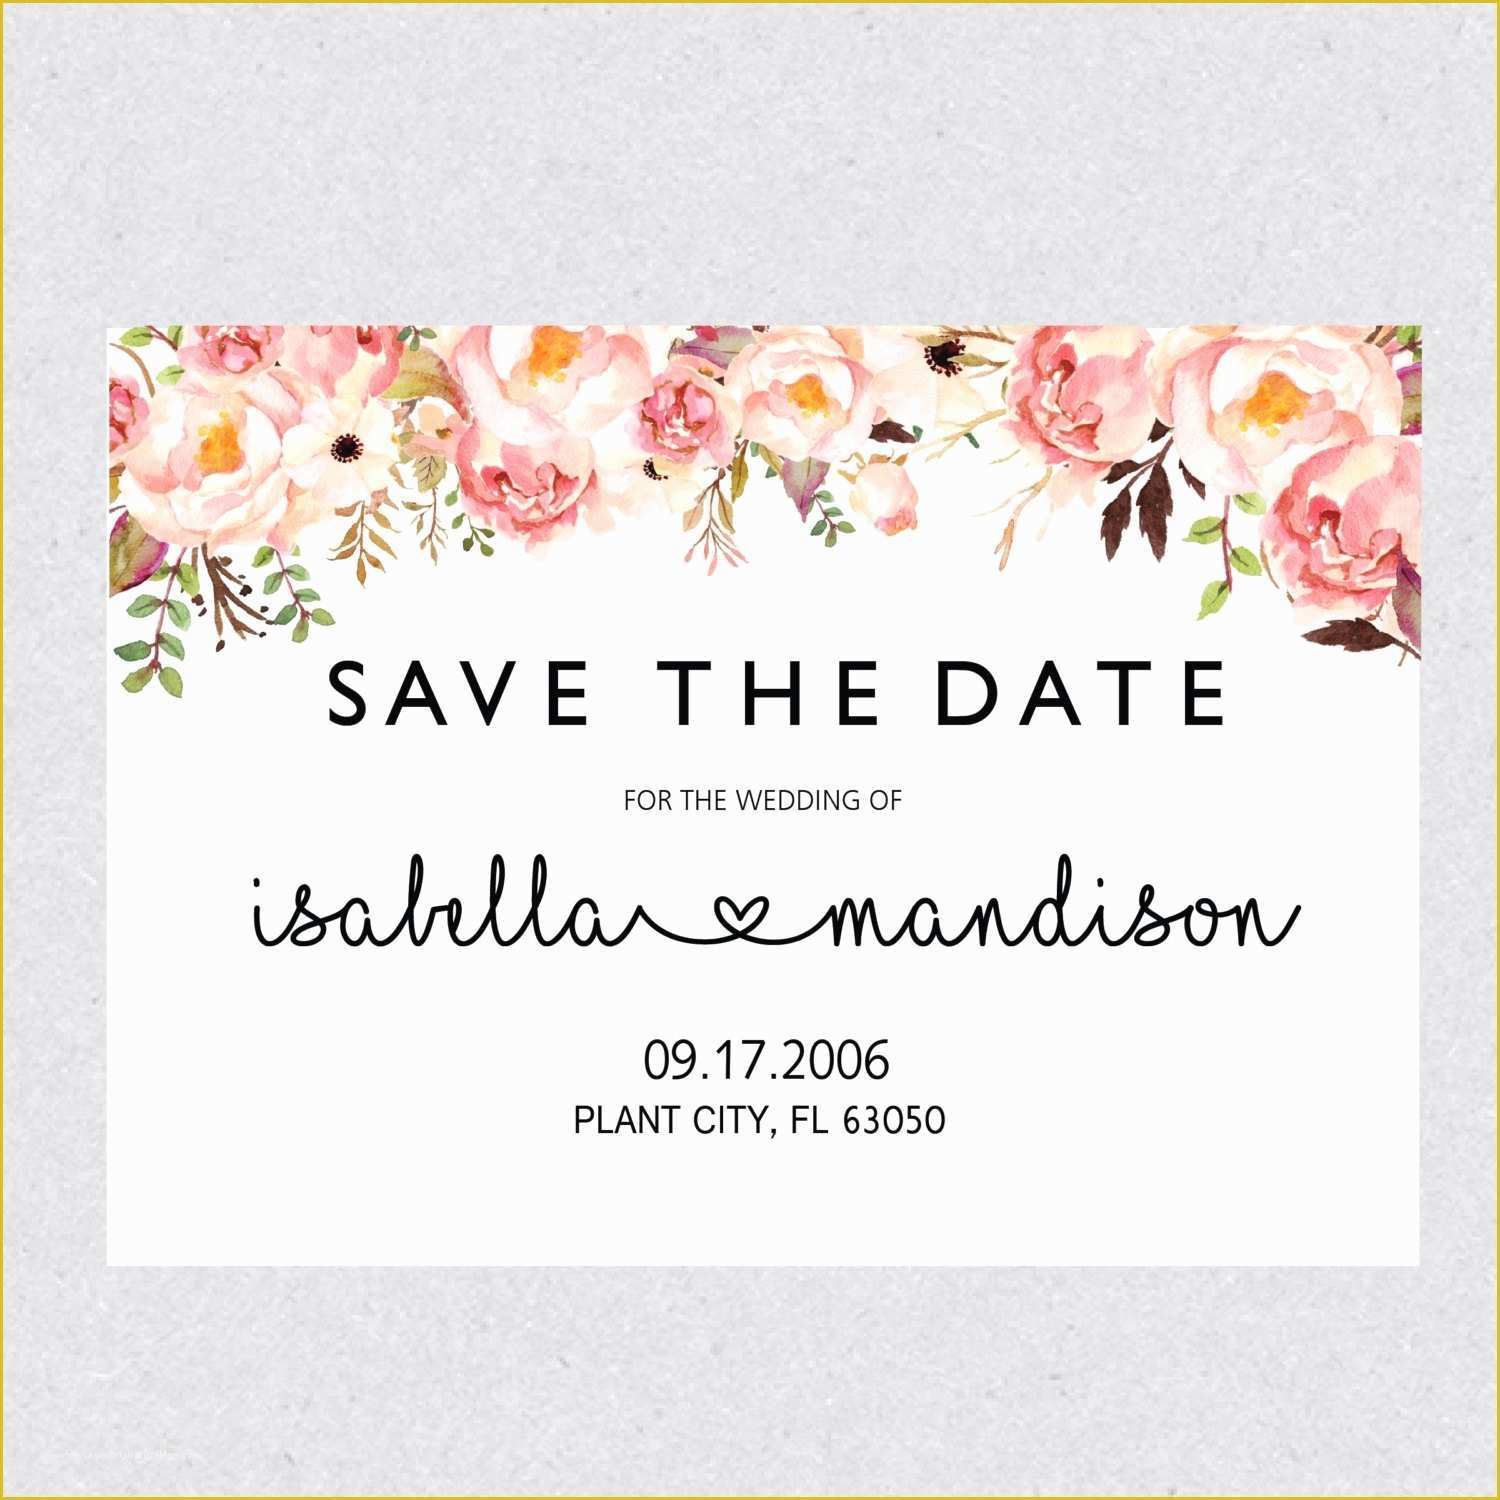 Free Save the Date Templates Word Of Printable Save the Date Template Card Floral Save the Date